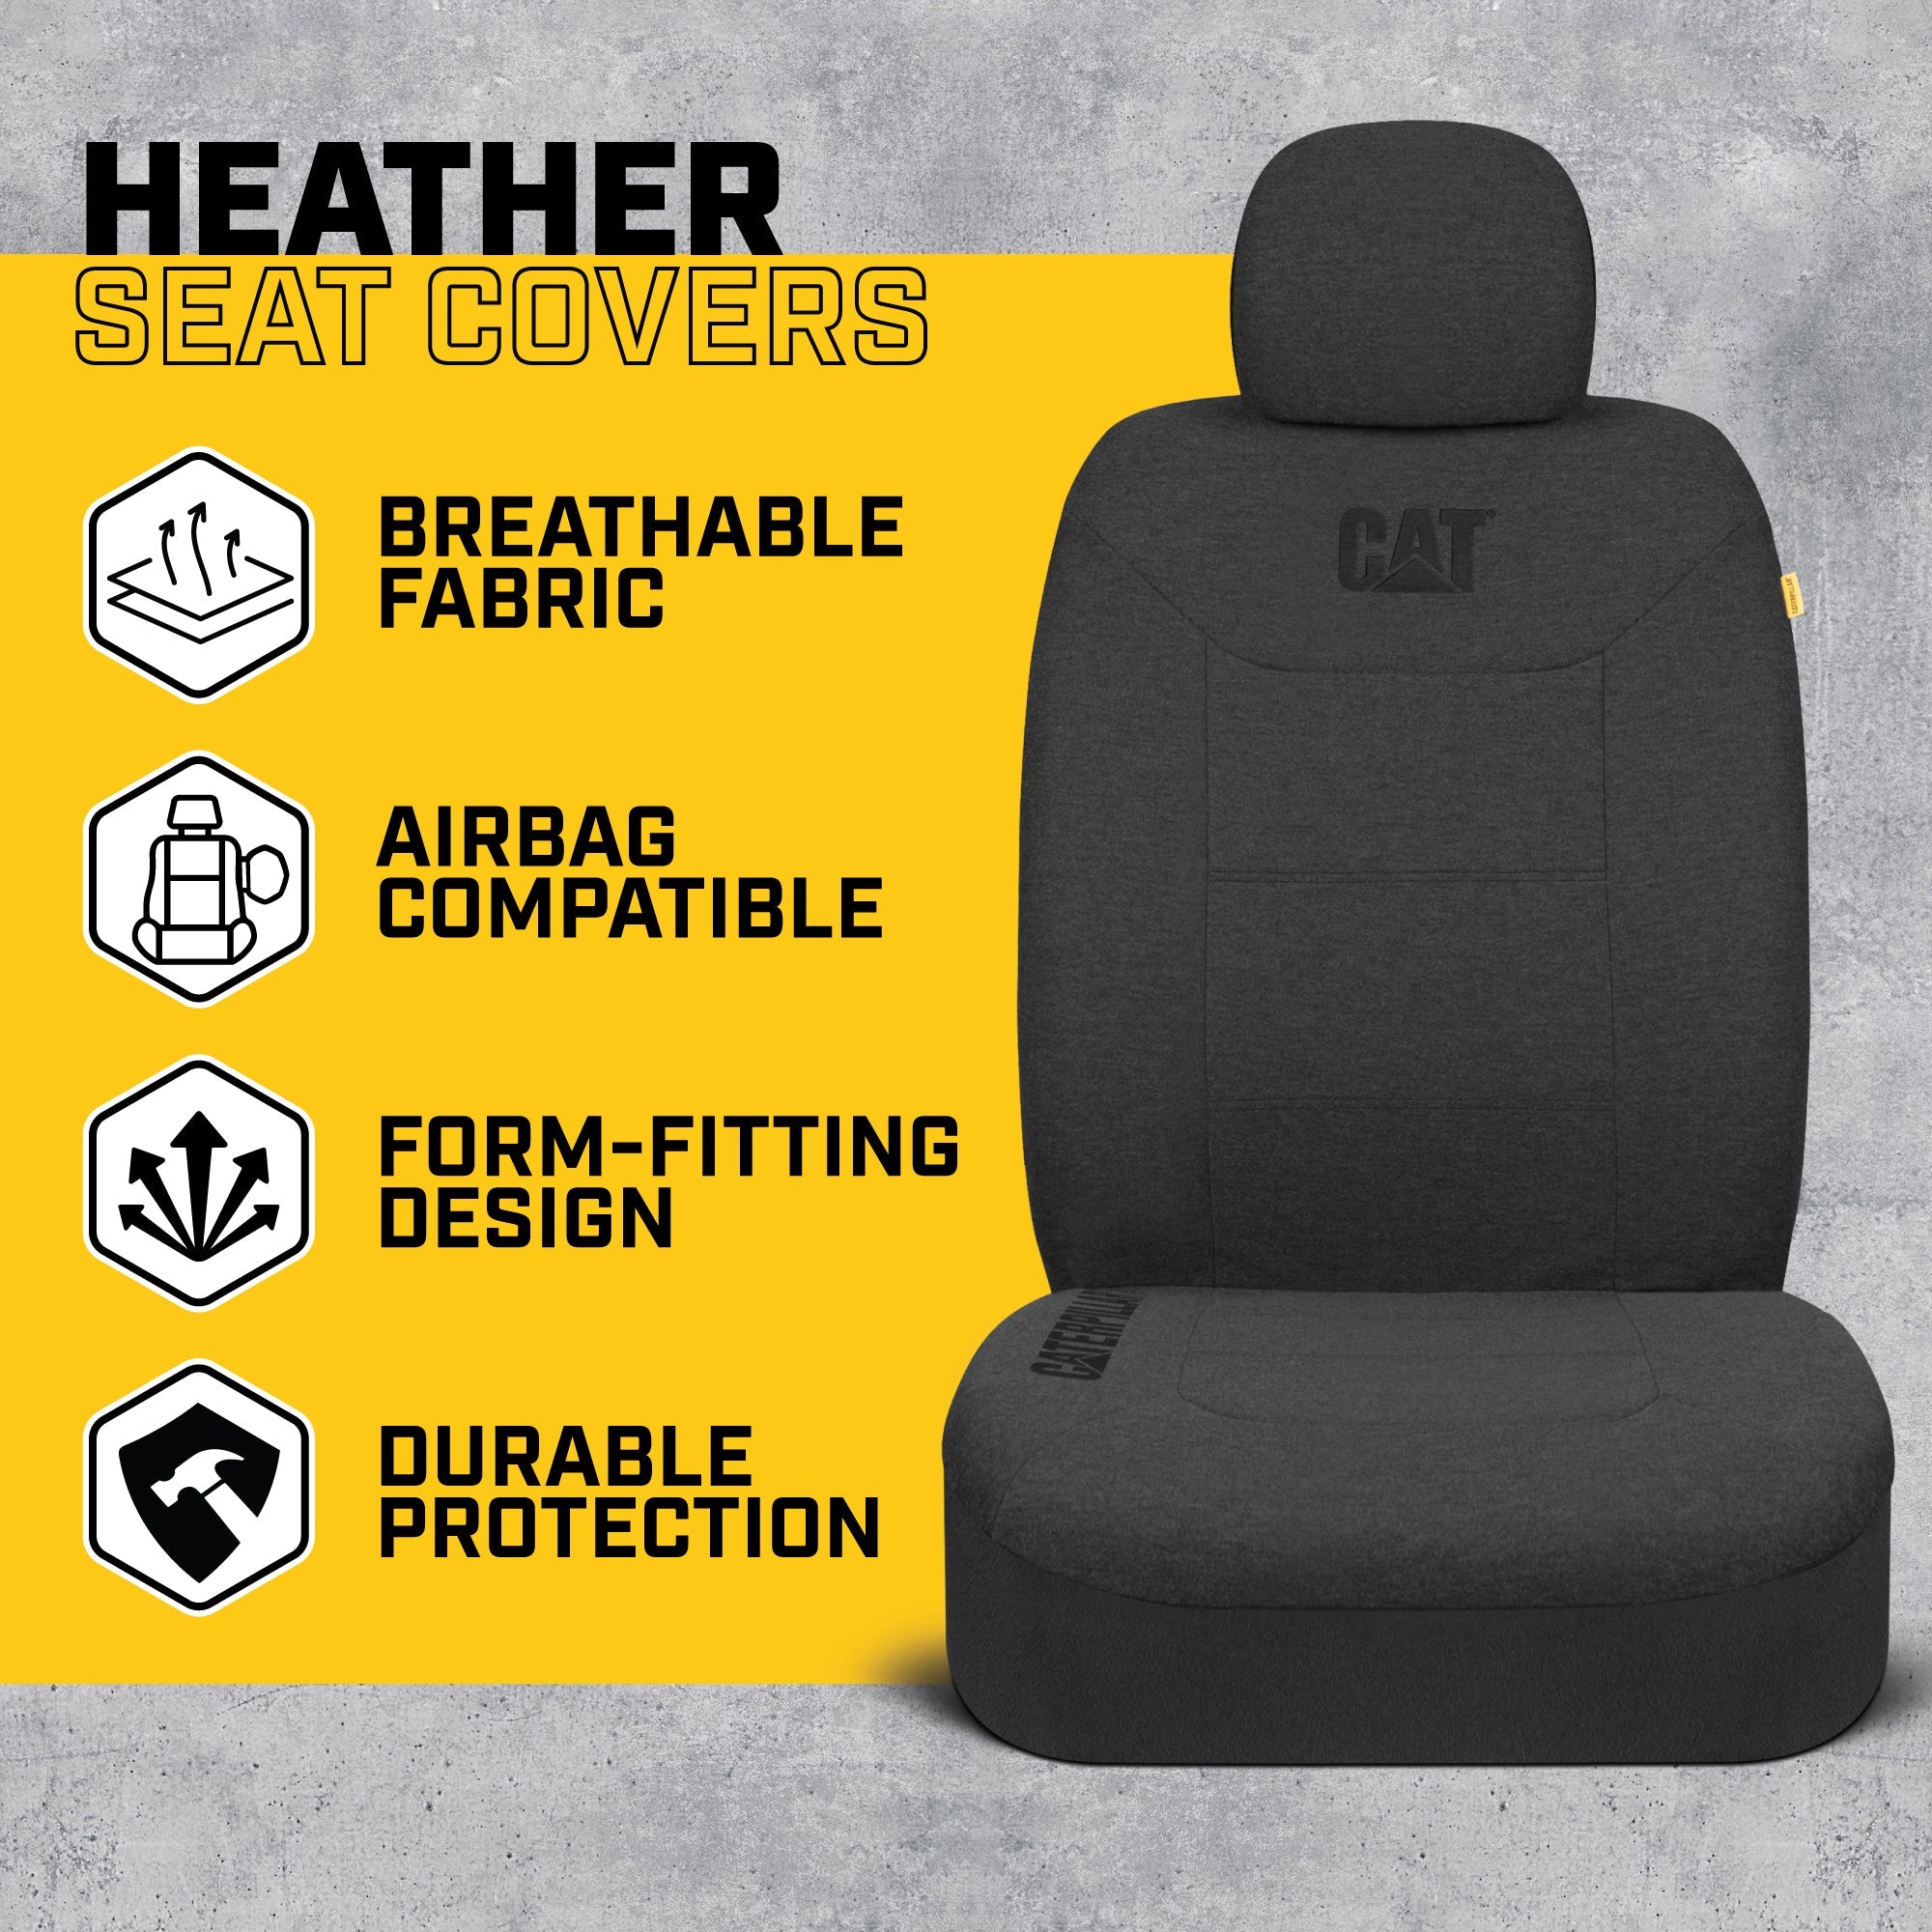 Cat® CozyBlend™ JerseyHeather Car Seat Covers Charcoal Gray Heather - Premium Jersey Fabric - Breathable Cotton Blend for Trucks SUV Automotive 2pc Front Set - Charcoal Gray Heather